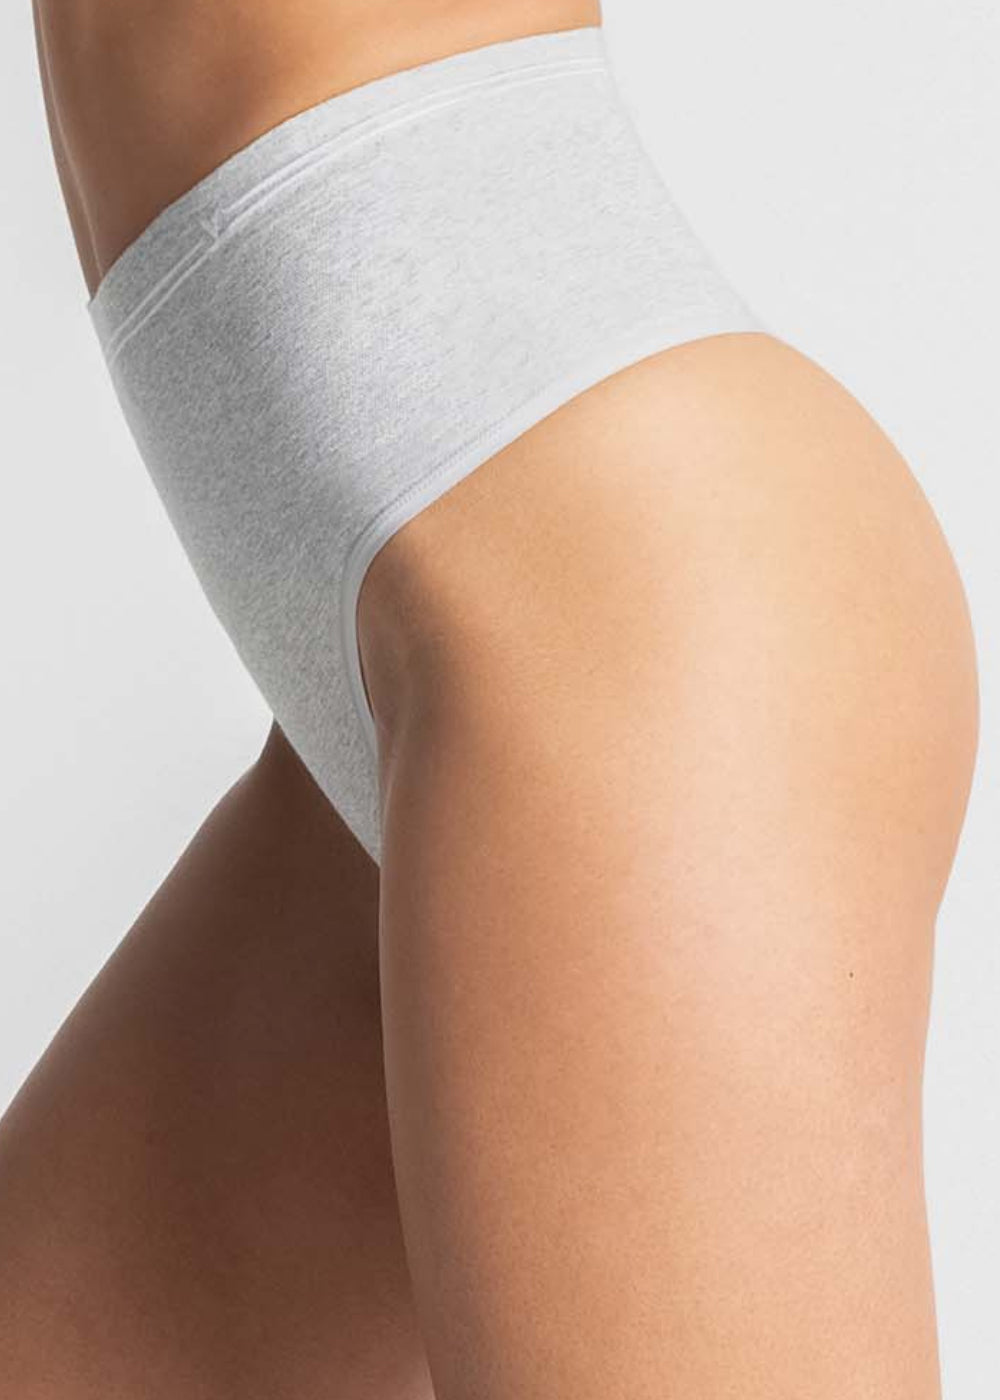 Breathable Seamless Cotton Seamless Cotton Thong For Women Smooth,  Comfortable, And Thin Fitness Underwear From Apparelfactoryseller, $1.92